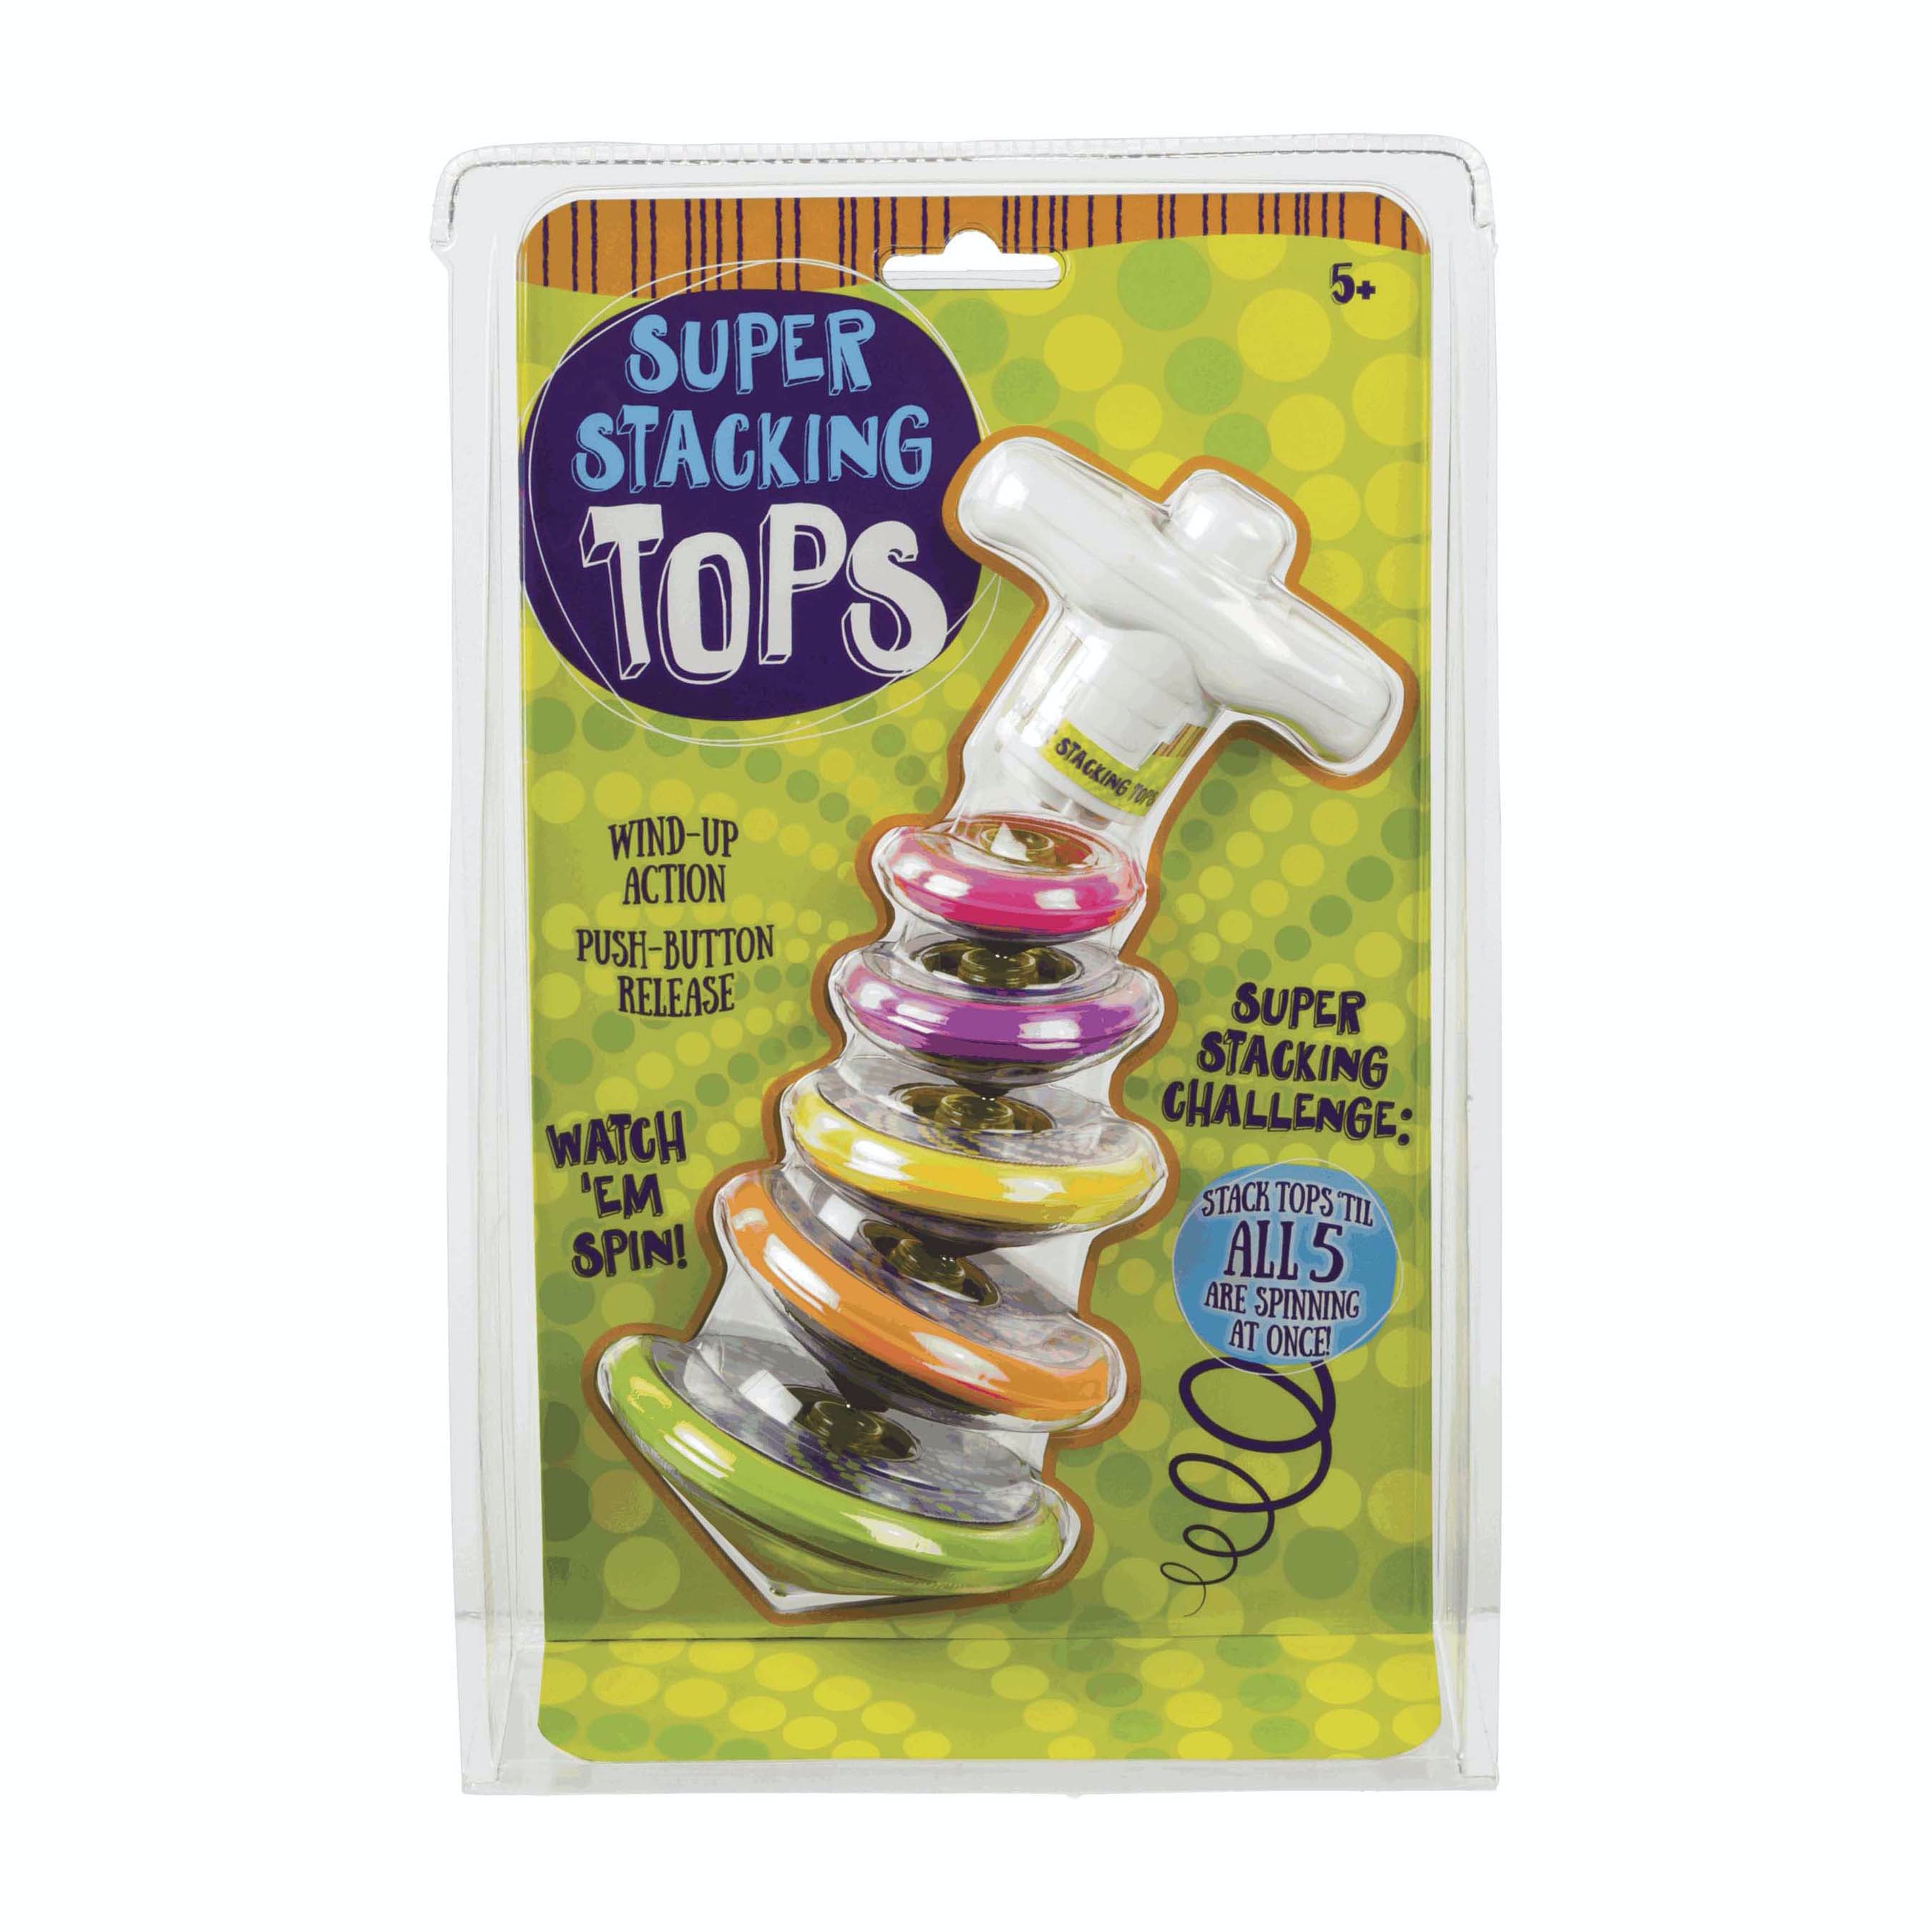 Spinning Tops Toy - 5  Stacking Tops Spin Individually or on Top of Each Other - Launcher with Stacking Spinner Tops